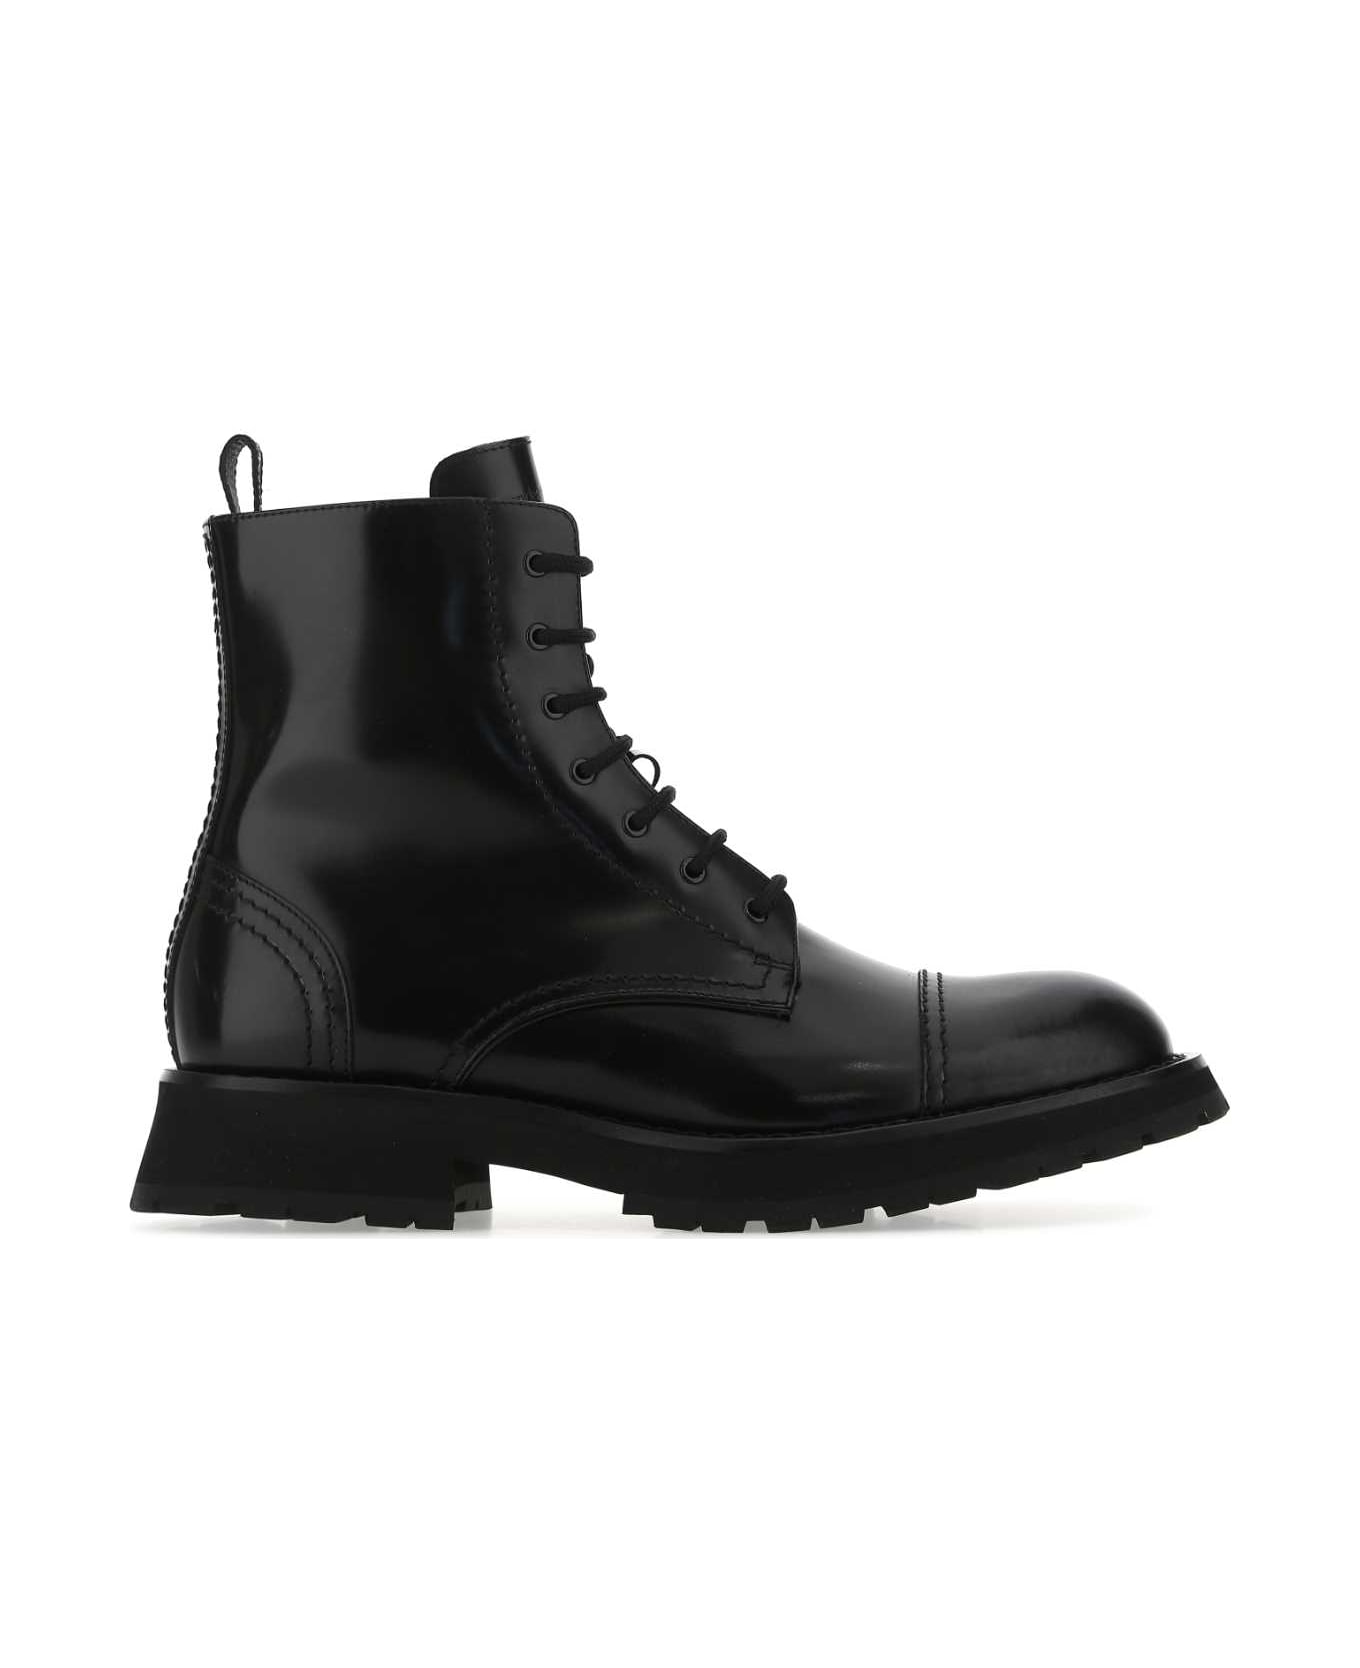 Alexander McQueen Black Leather Ankle Boots - 1000 ブーツ